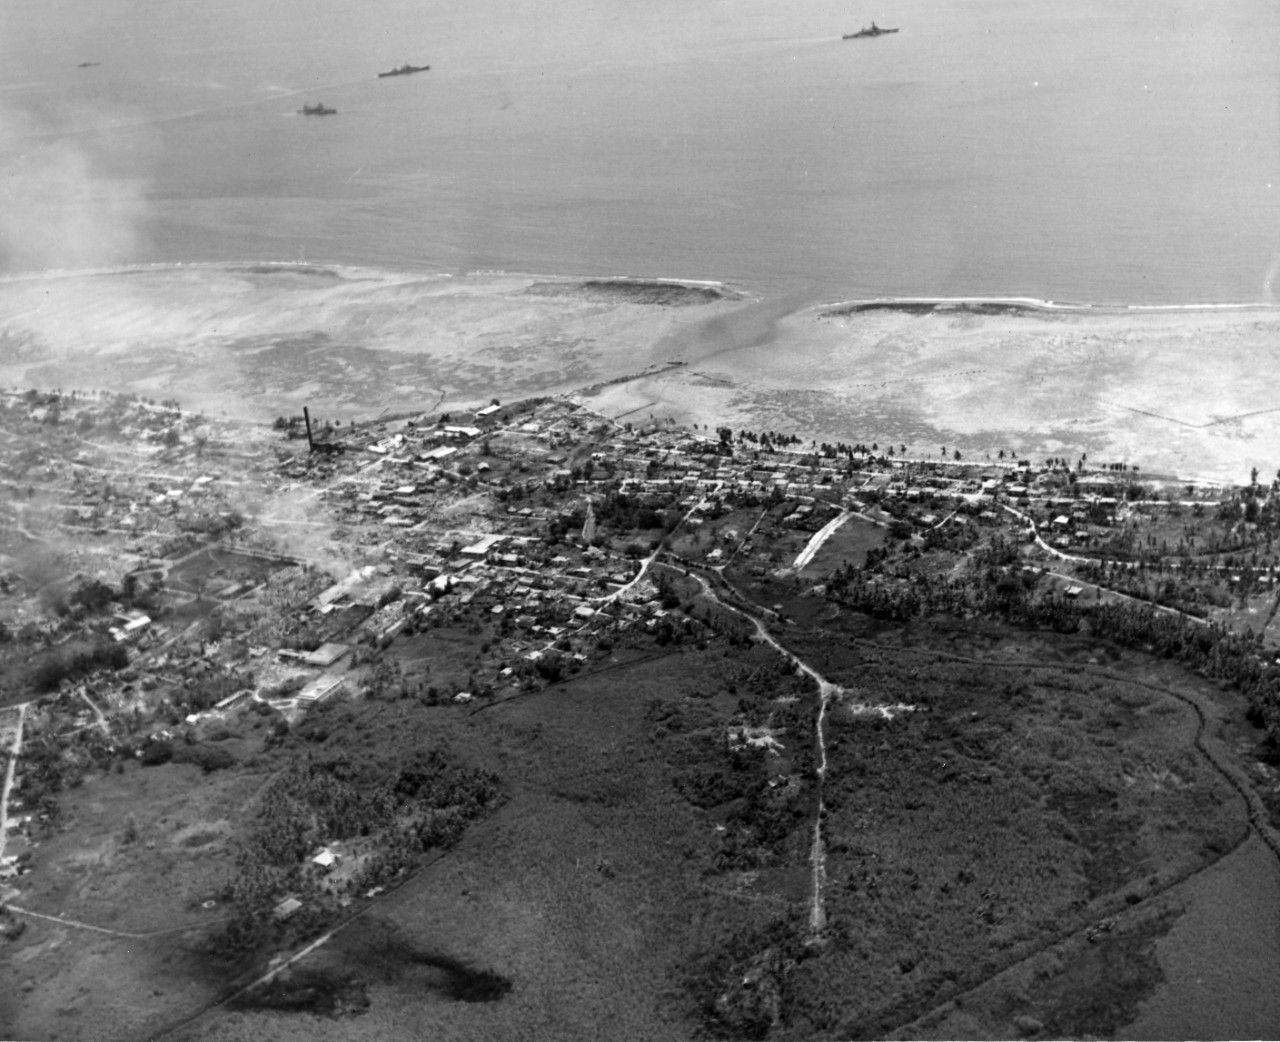 Aerial of Agana, Guam. Photo taken by plane from USS Yorktown (CV-10). September 5, 1944. Photo is from the CAPT Hays R. Browning Photo Collection. 